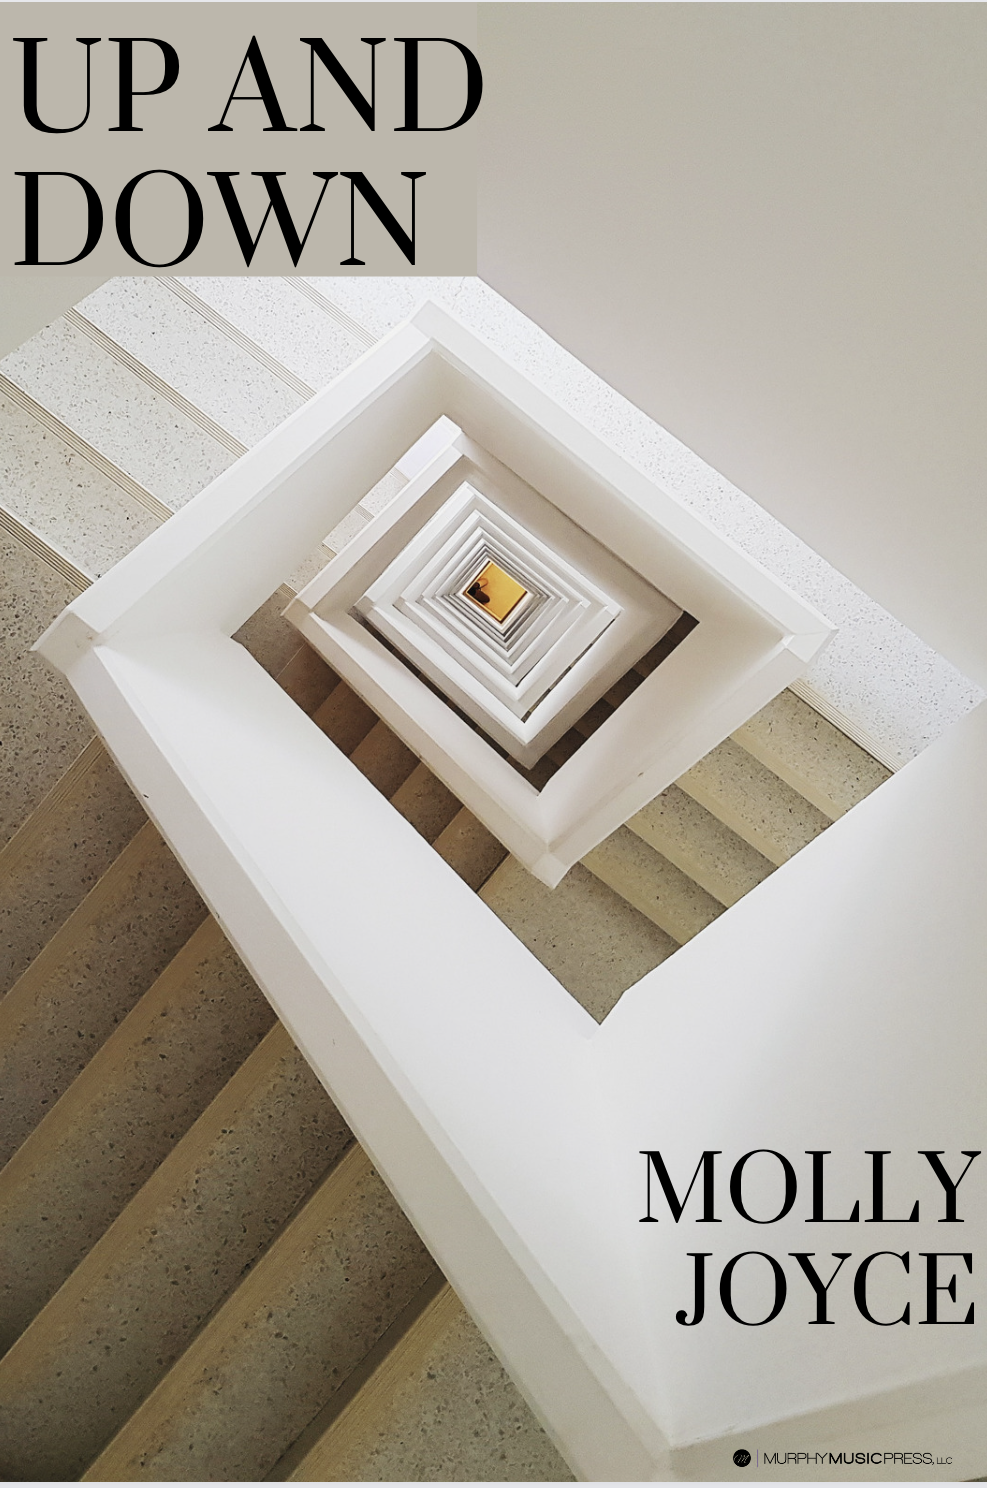 Up And Down by Molly Joyce